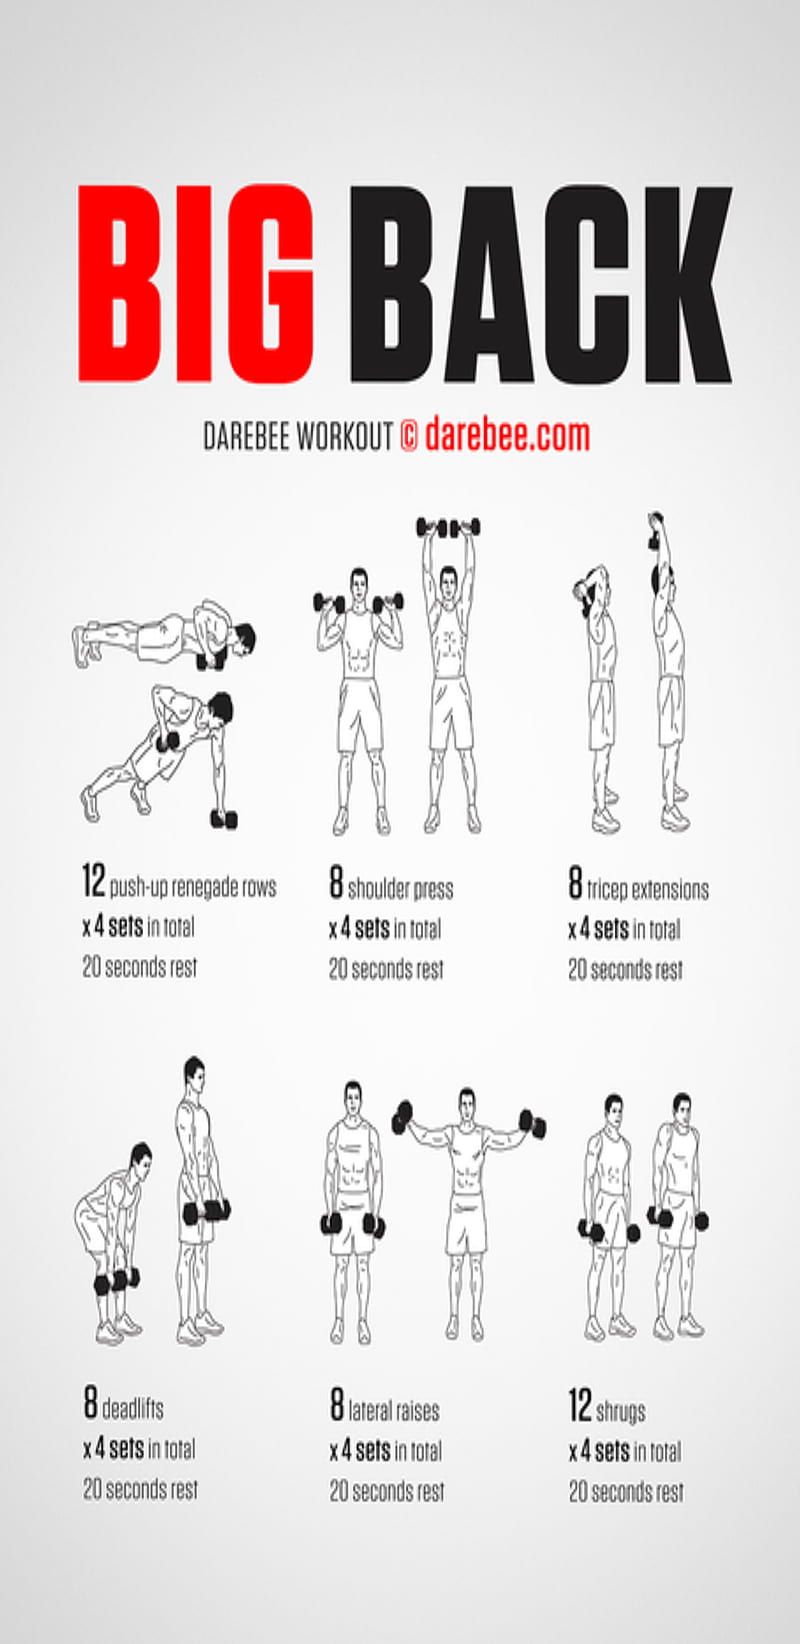 Big back fitness, gym, health, lift, men, muscle, weights, workout, HD ...